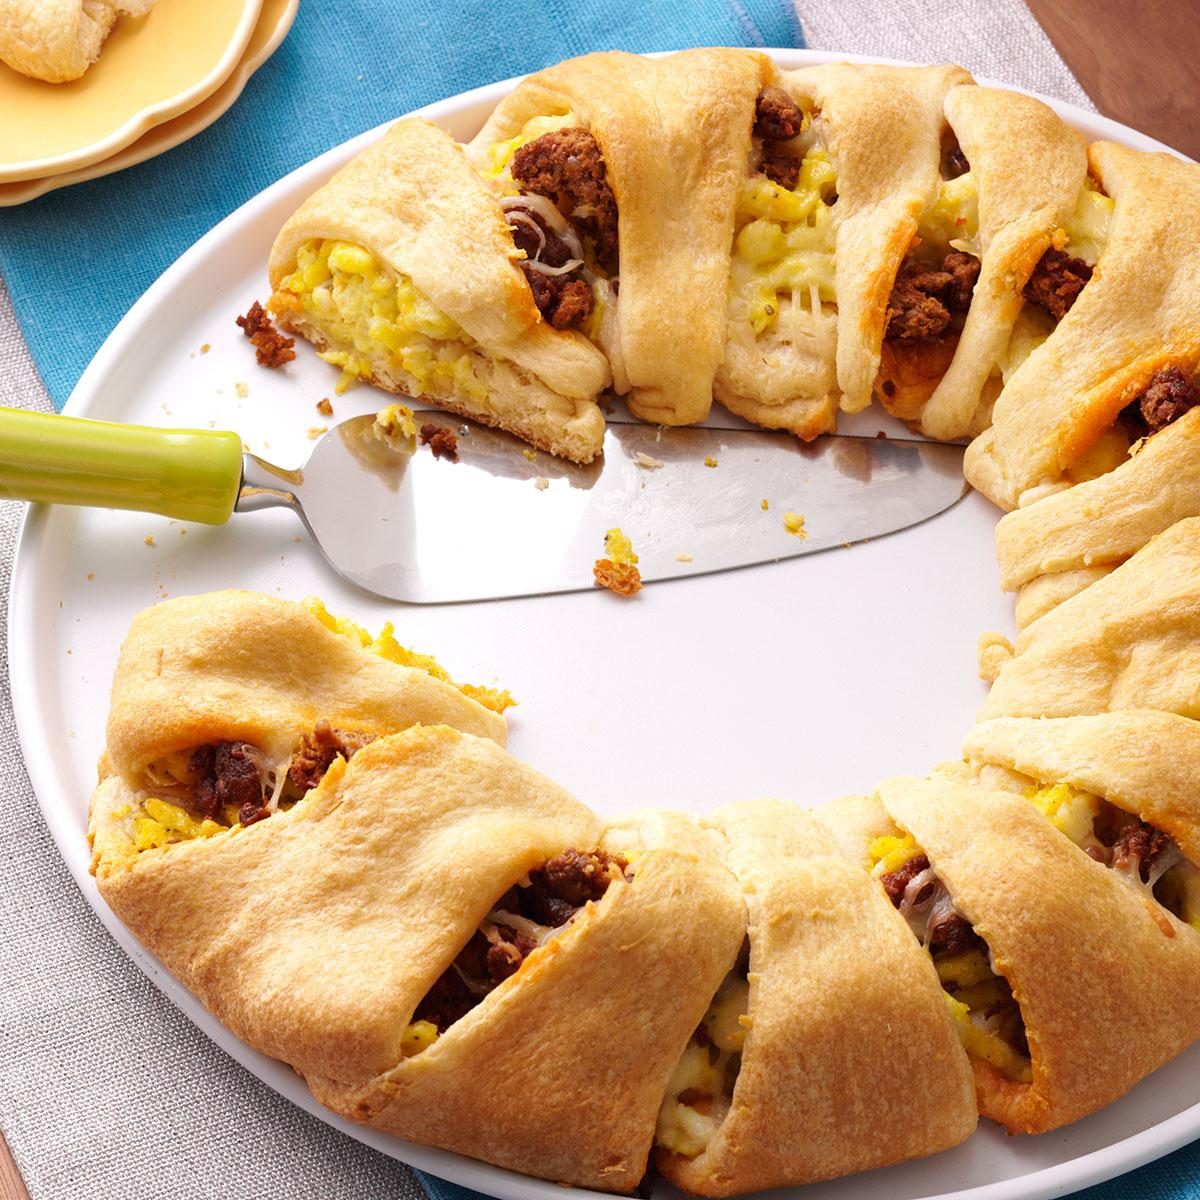 Cream Cheese and Sausage Crescent Roll Ring ⋆ Real Housemoms